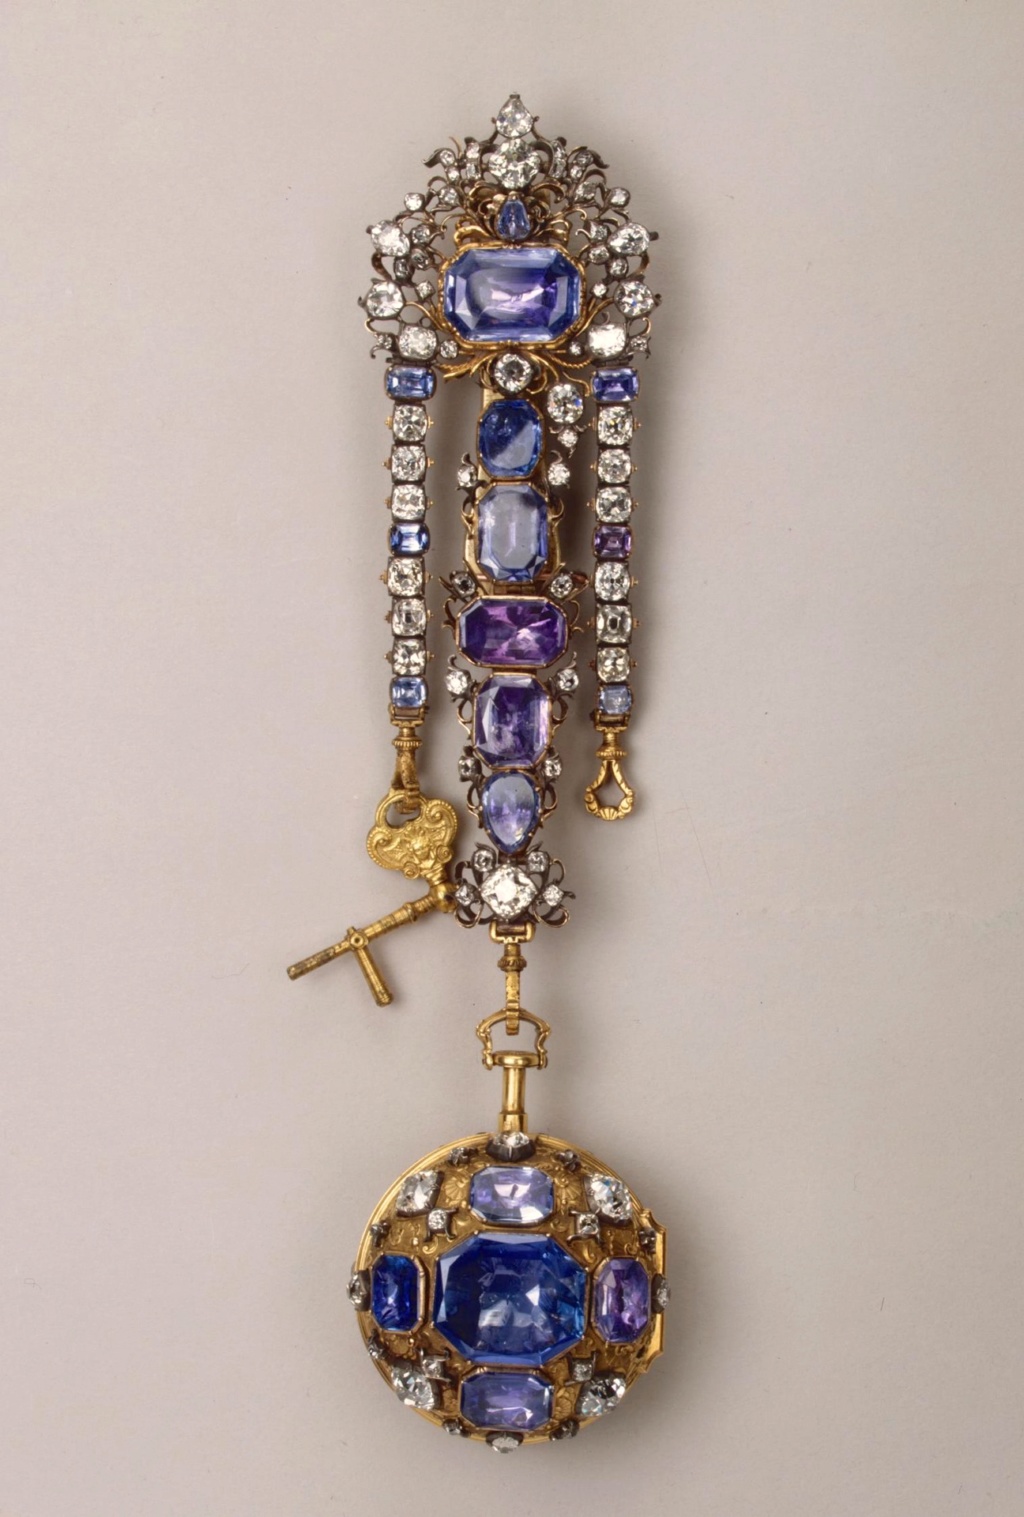 Exposition : Jewels ! Glittering at the Russian Court, Hermitage Amsterdam Woa_im88